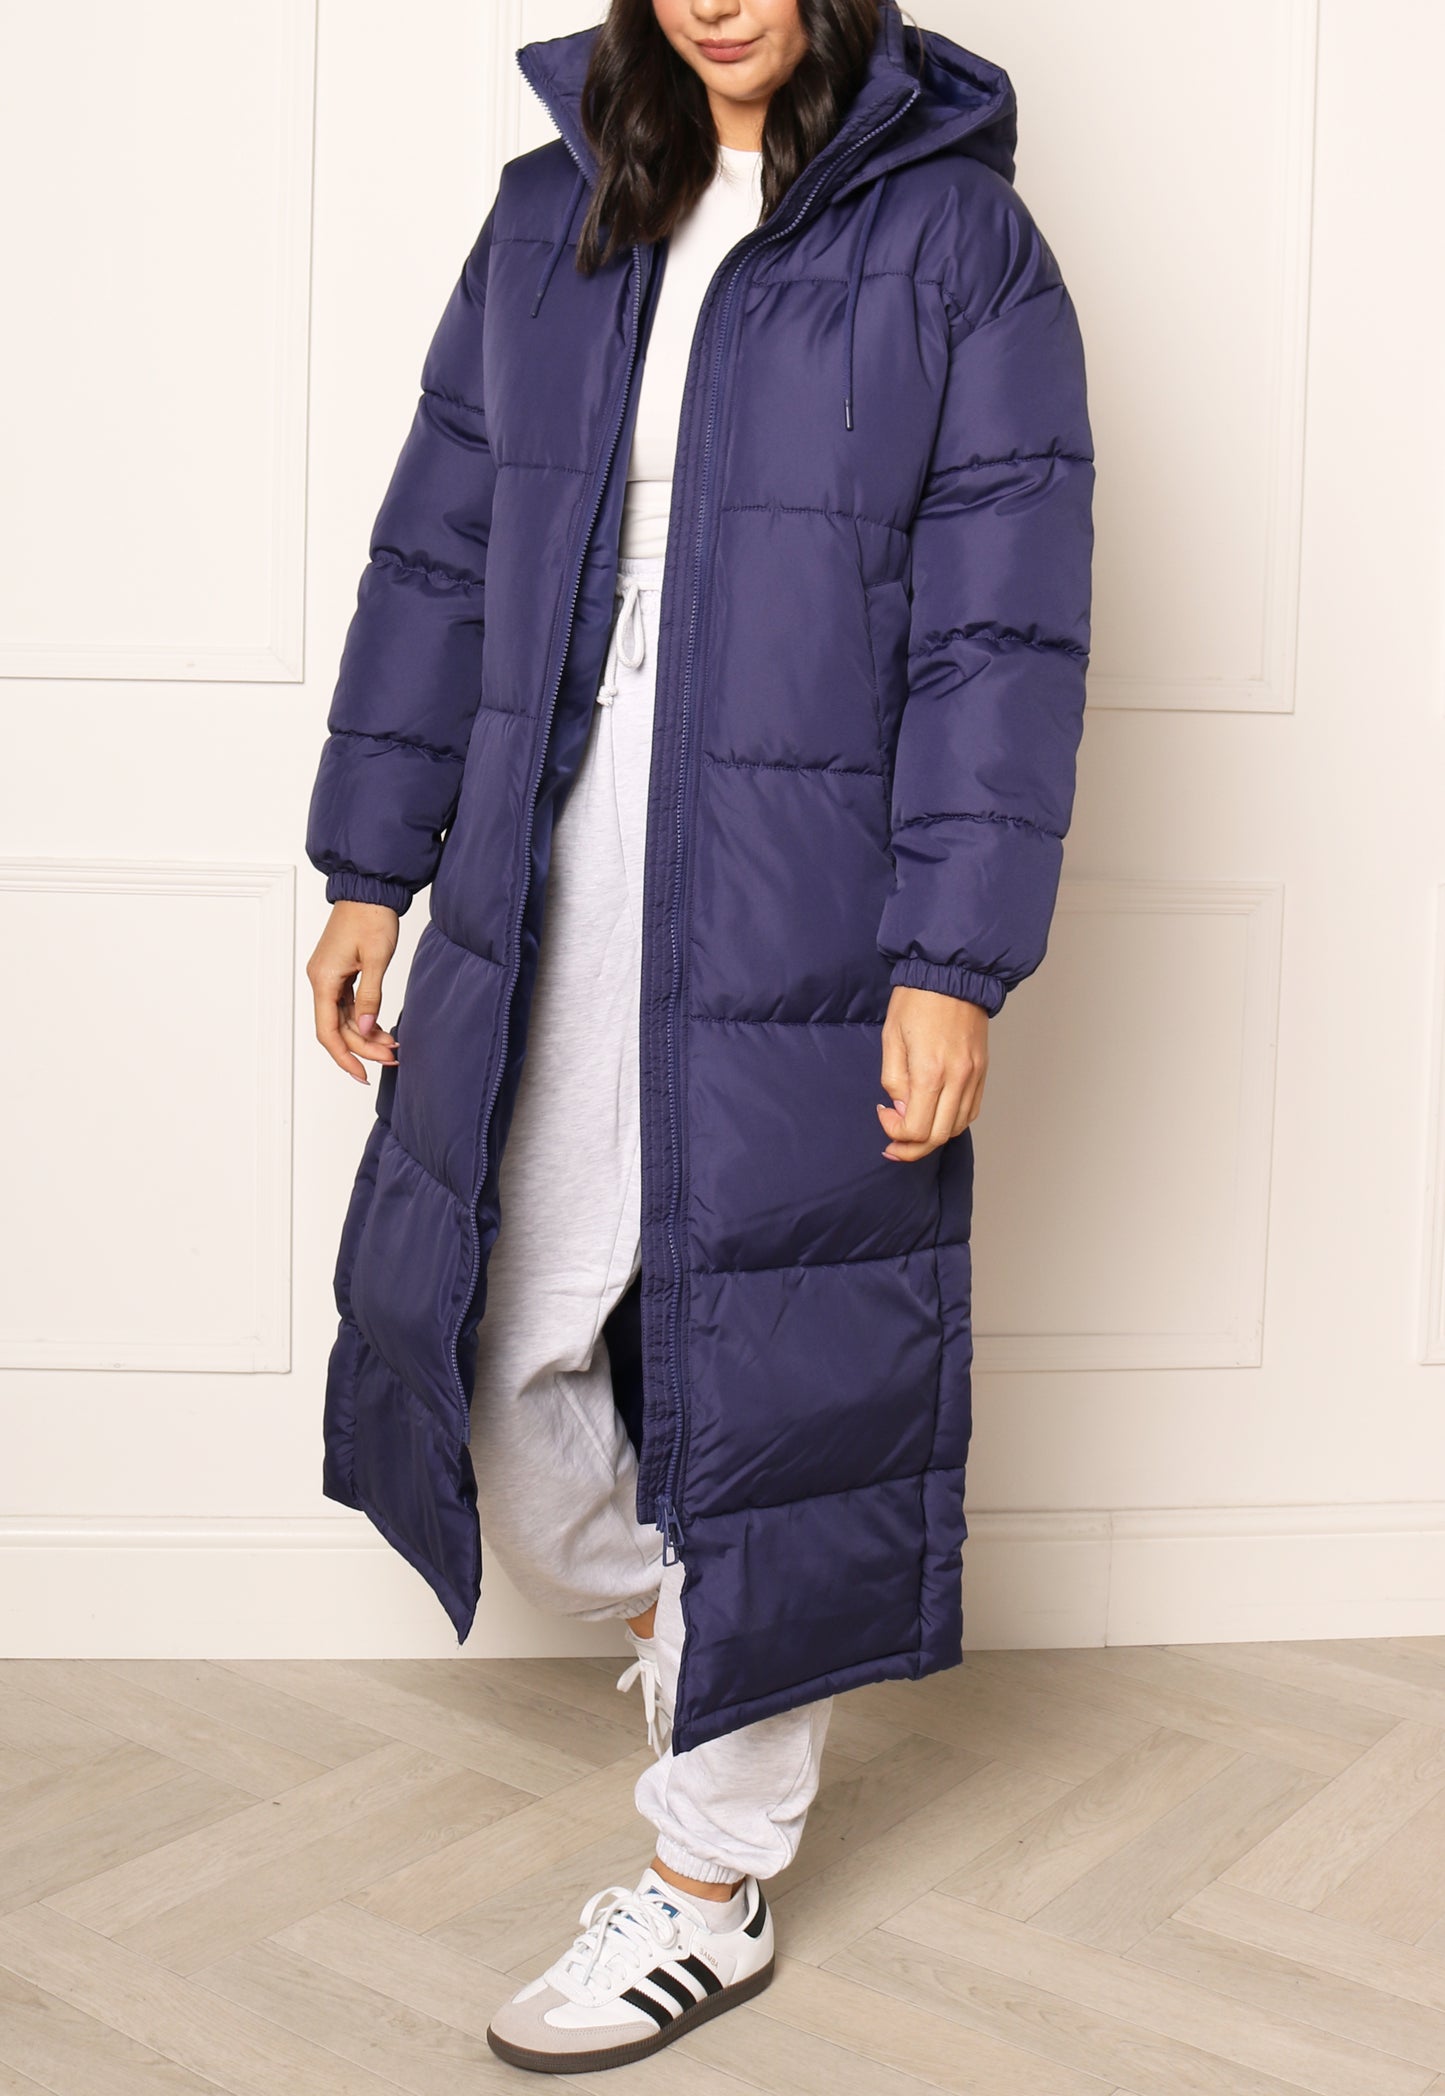 VERO MODA Klea Maxi Longline Puffer Coat with Hood in French Navy - One Nation Clothing